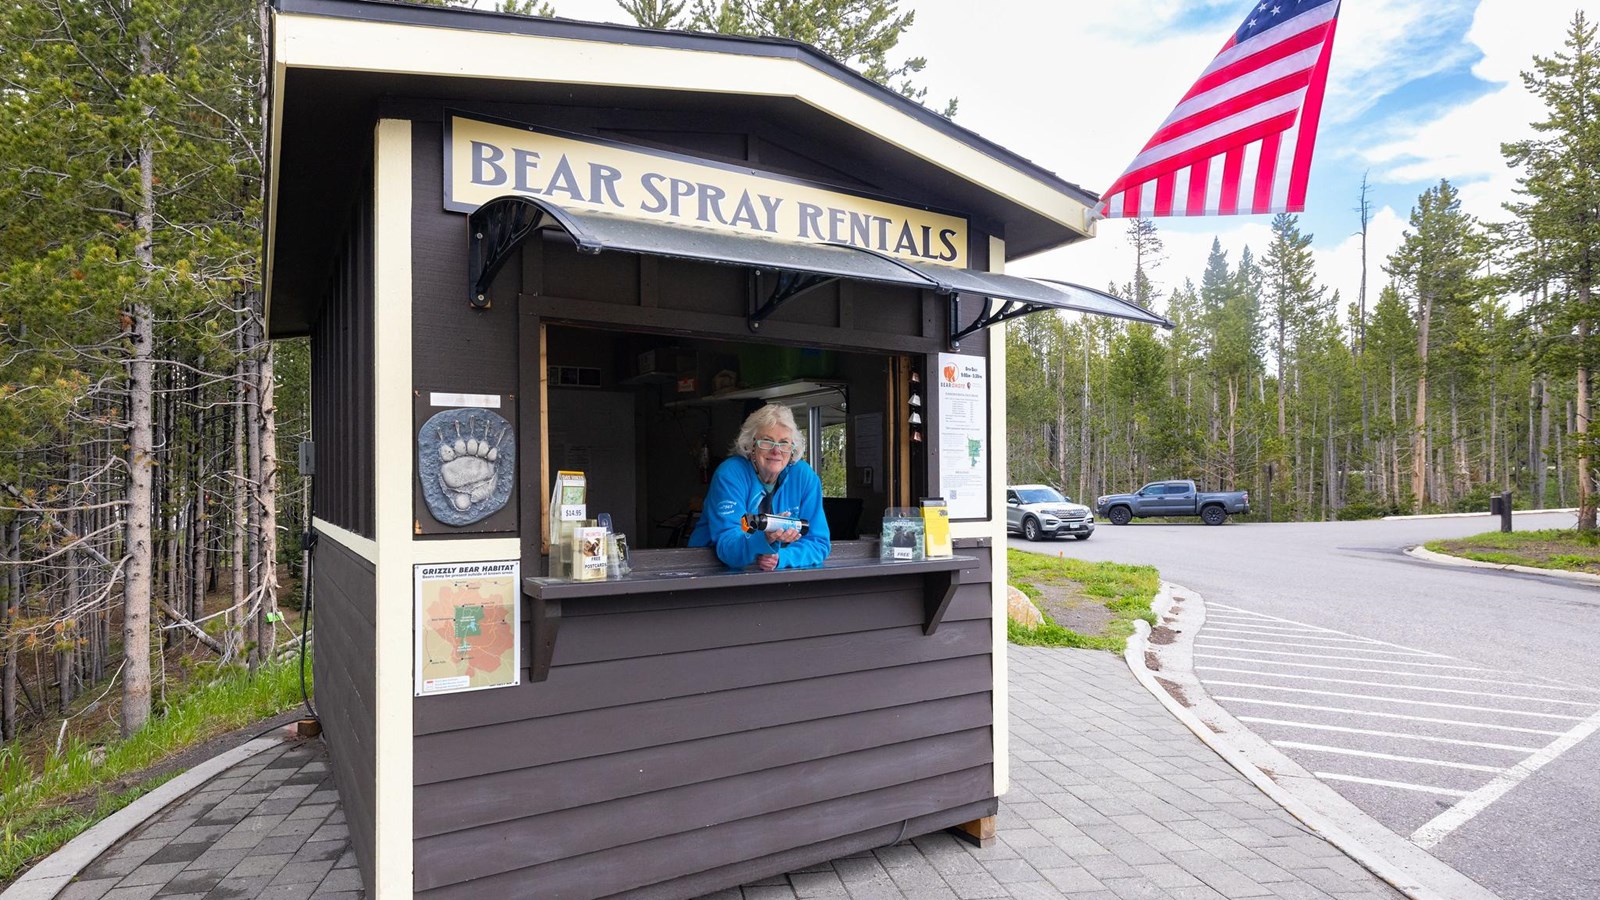 An employee leans out the window of a bear spray rental kiosk with a can of bear spray.